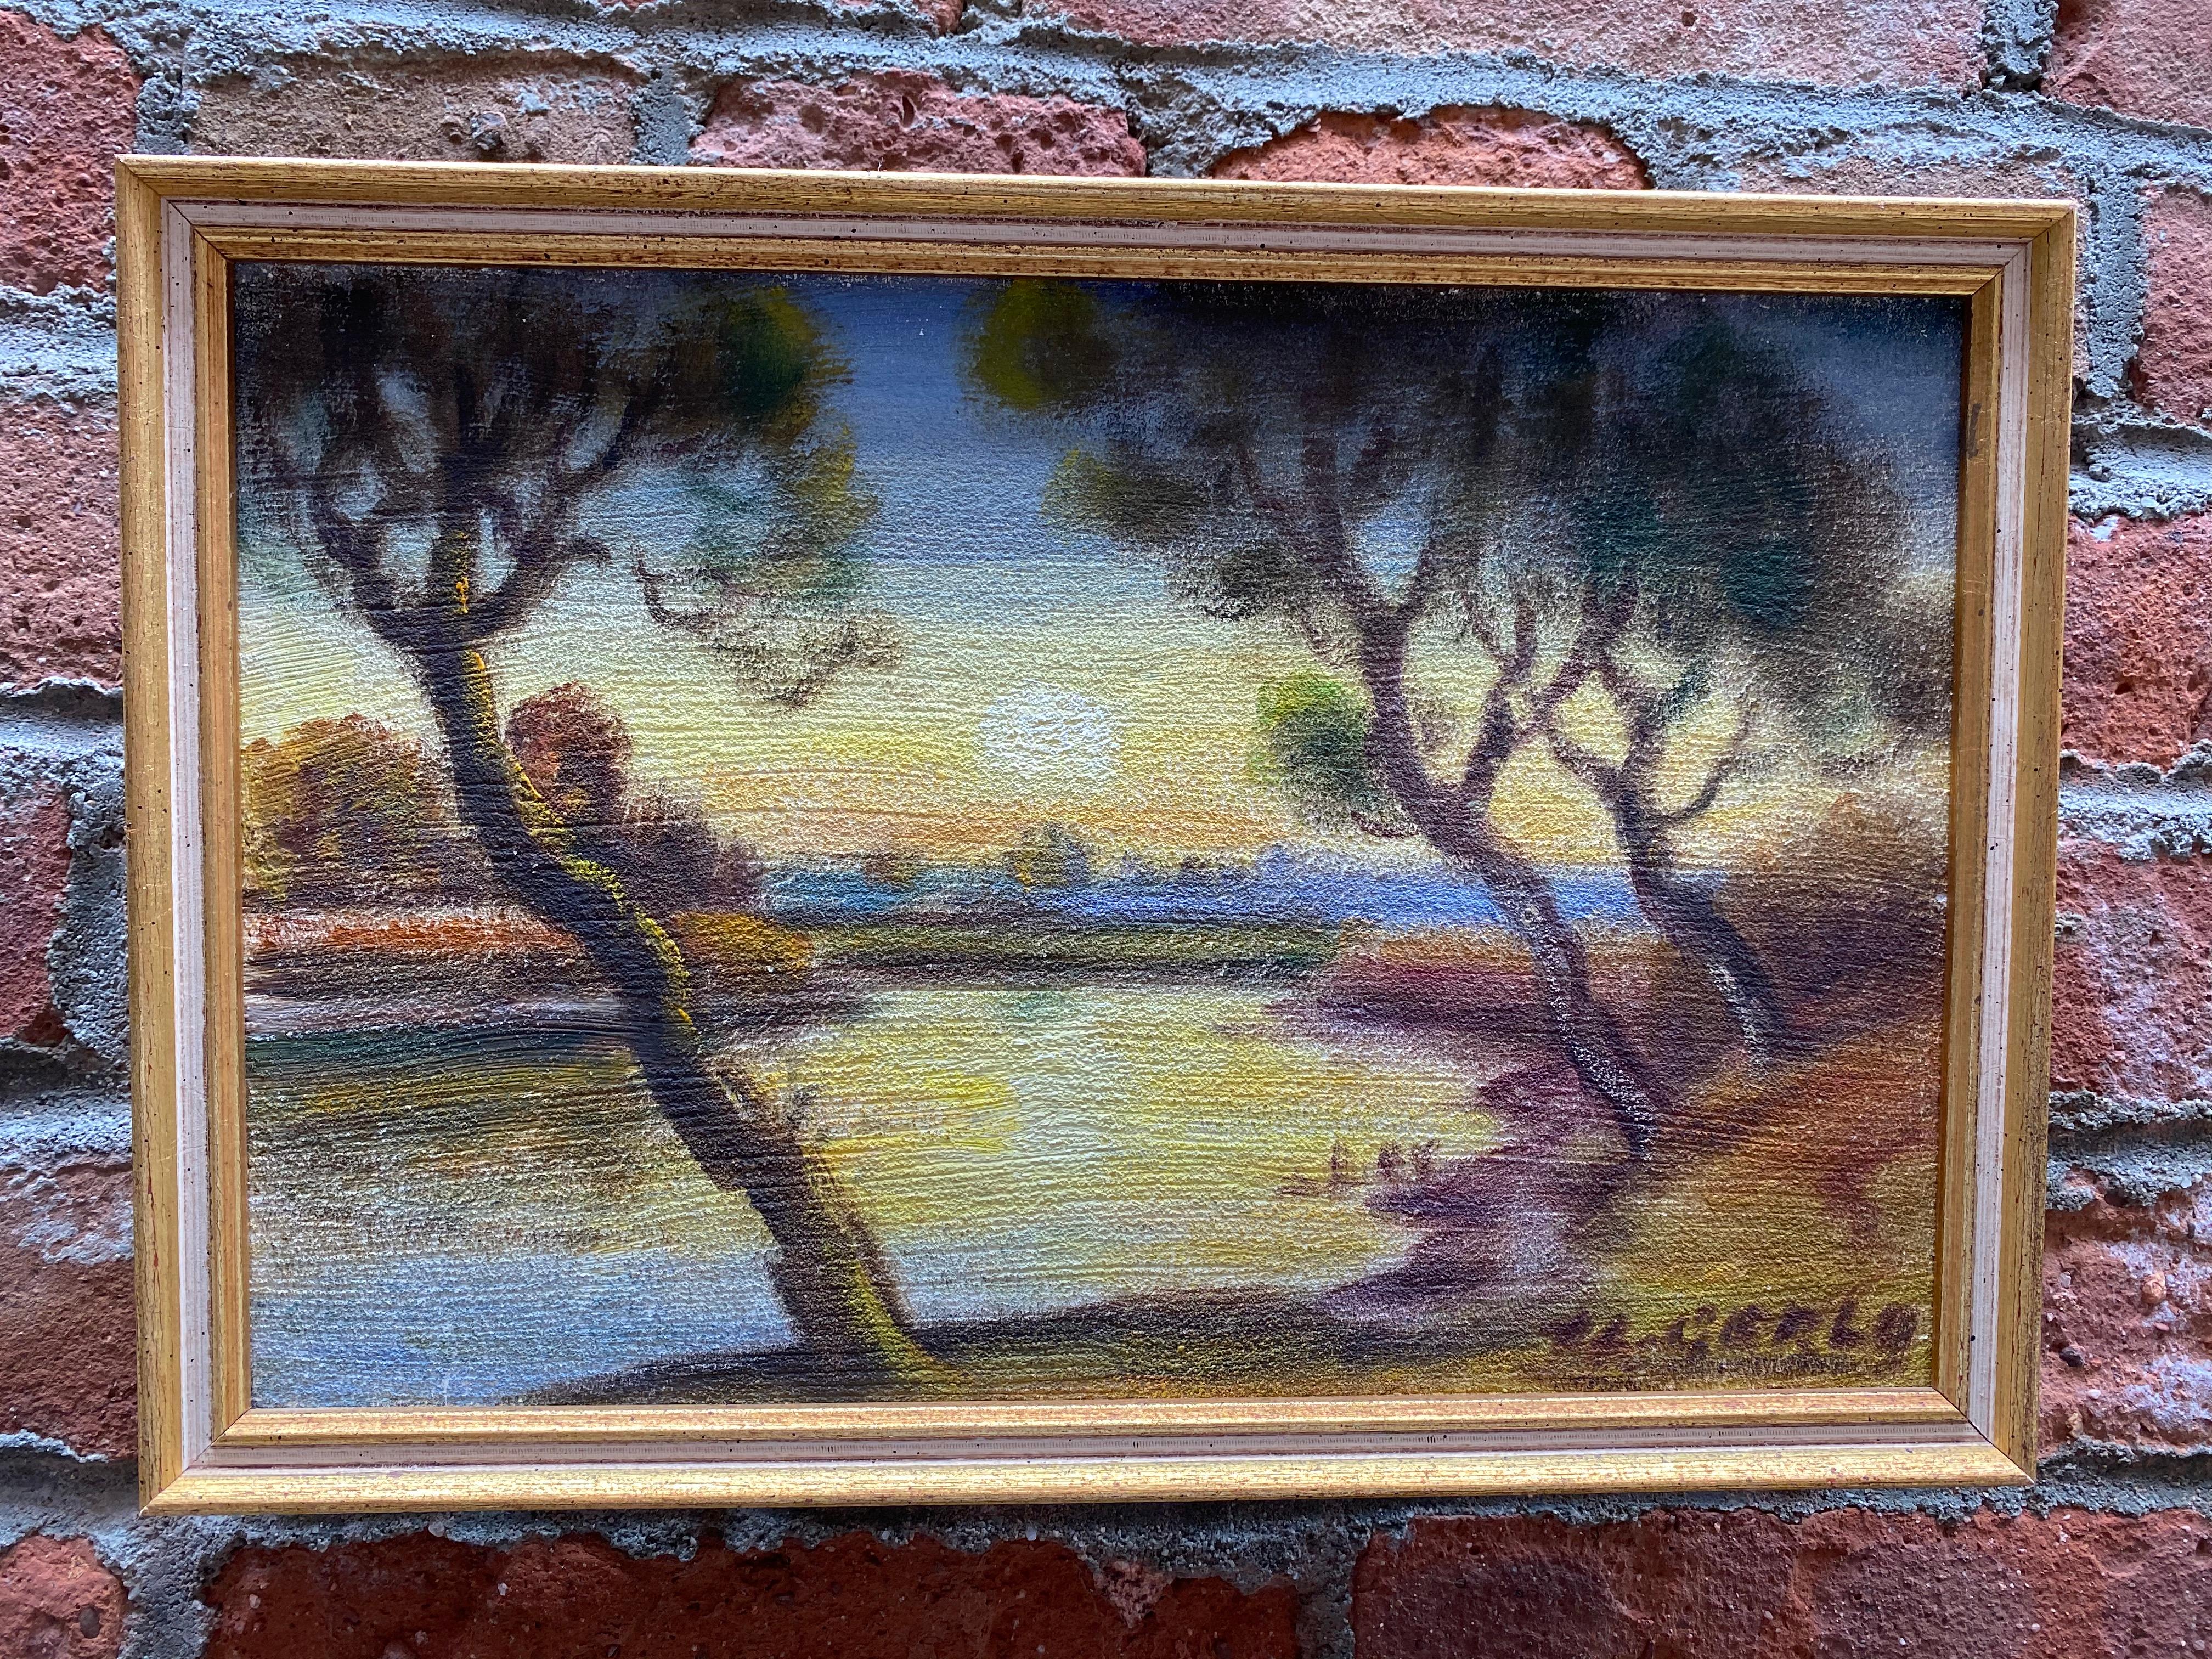 A jewel of a painting by Belgian artist, Urbain Gerlo (1897-1986). Gerlo has depicted a hazy lake sunset between two trees. Oil paint on canvas board. Painted circa 1960. Very good condition. Framing treatment consists of a simple gilded wood